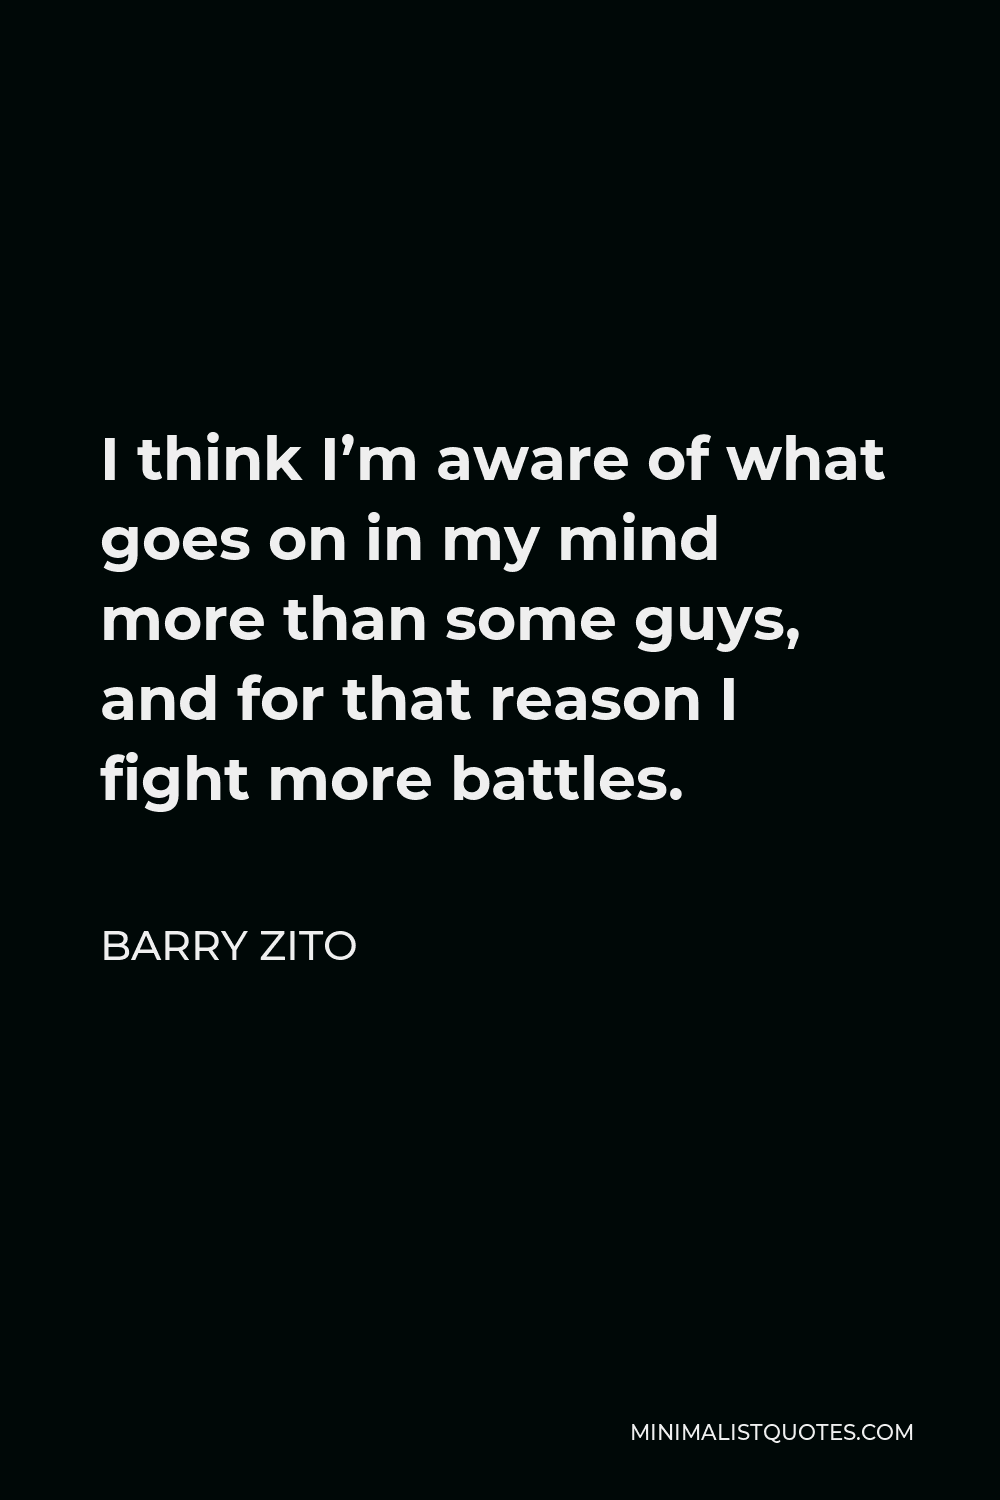 Barry Zito Quote - I think I’m aware of what goes on in my mind more than some guys, and for that reason I fight more battles.